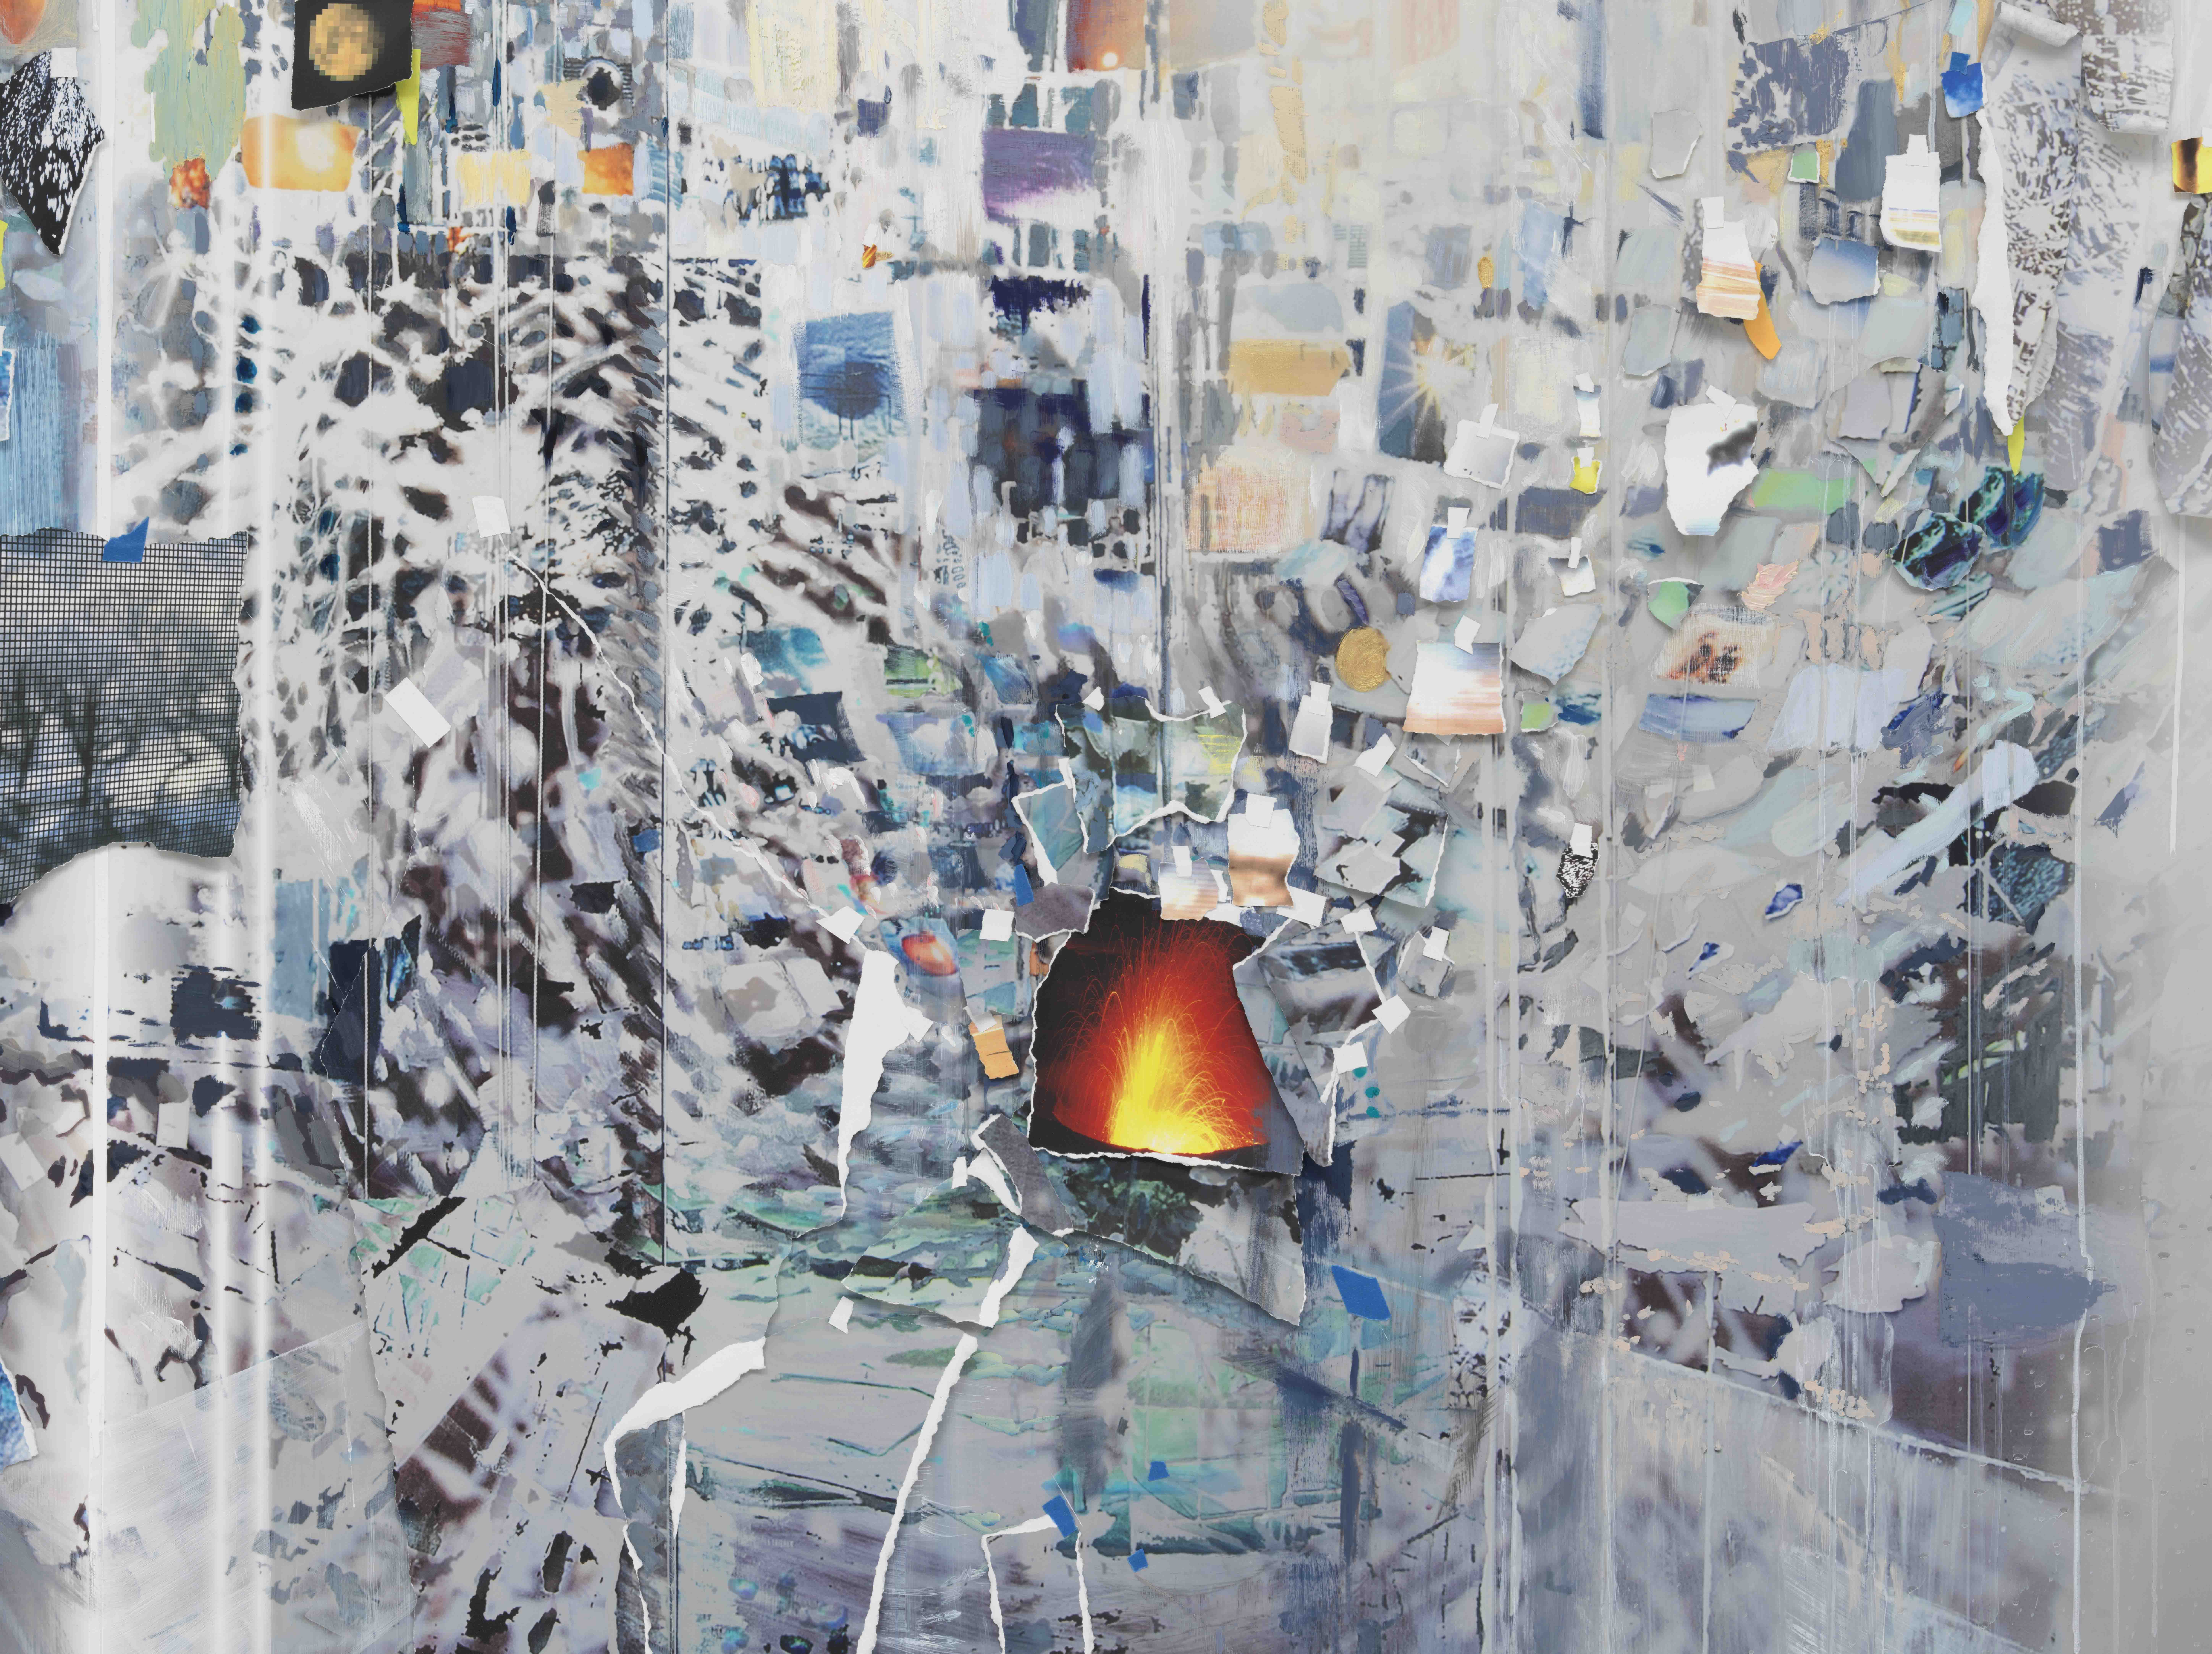 Gagosian Rome presents new works by Sarah Sze